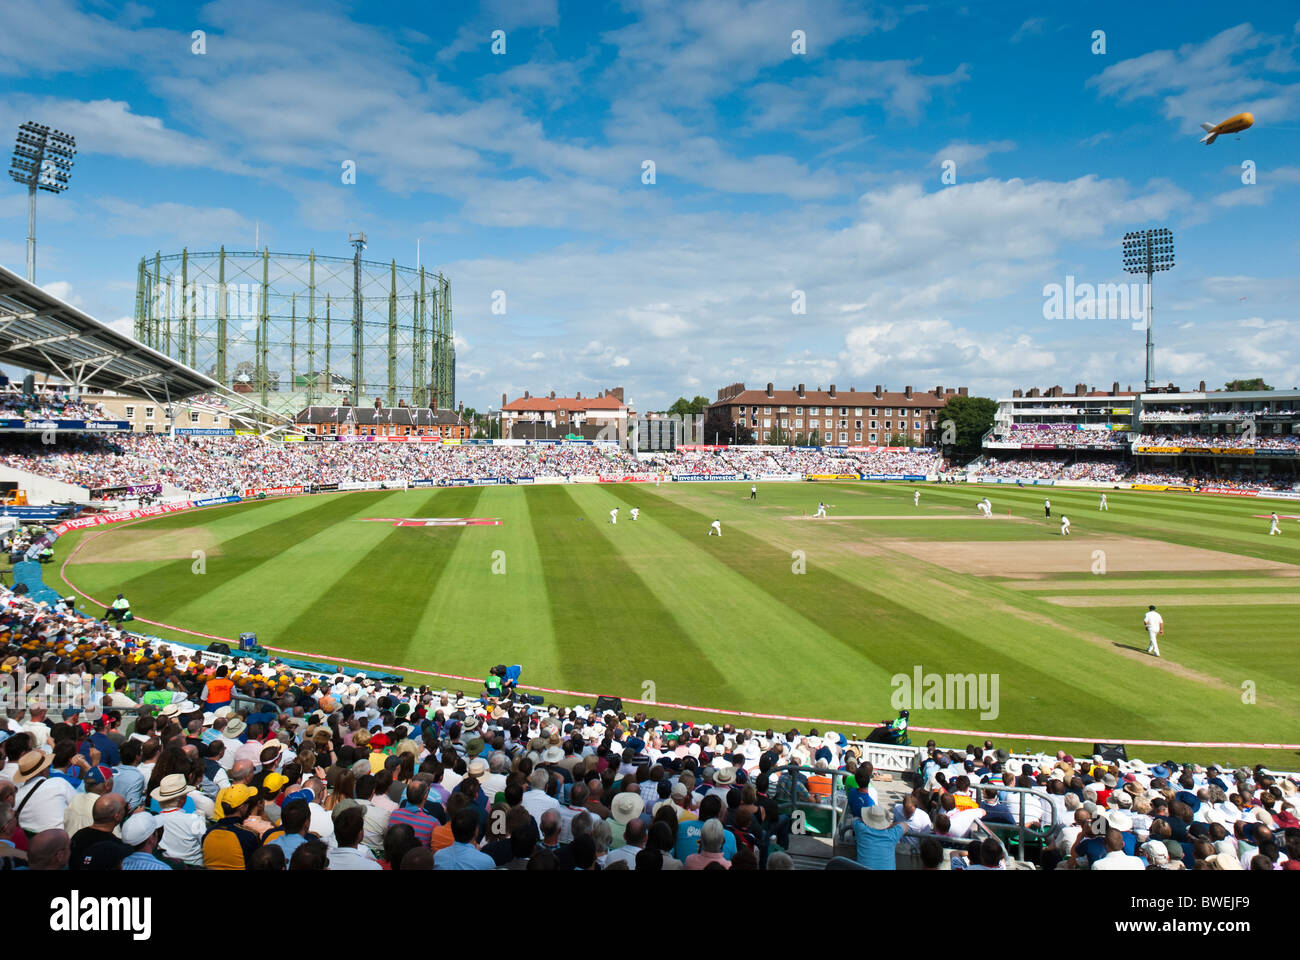 The crowd at the Oval cricket ground in Vauxhall, London, for Day 4 of the 2009 Ashes test match. Stock Photo